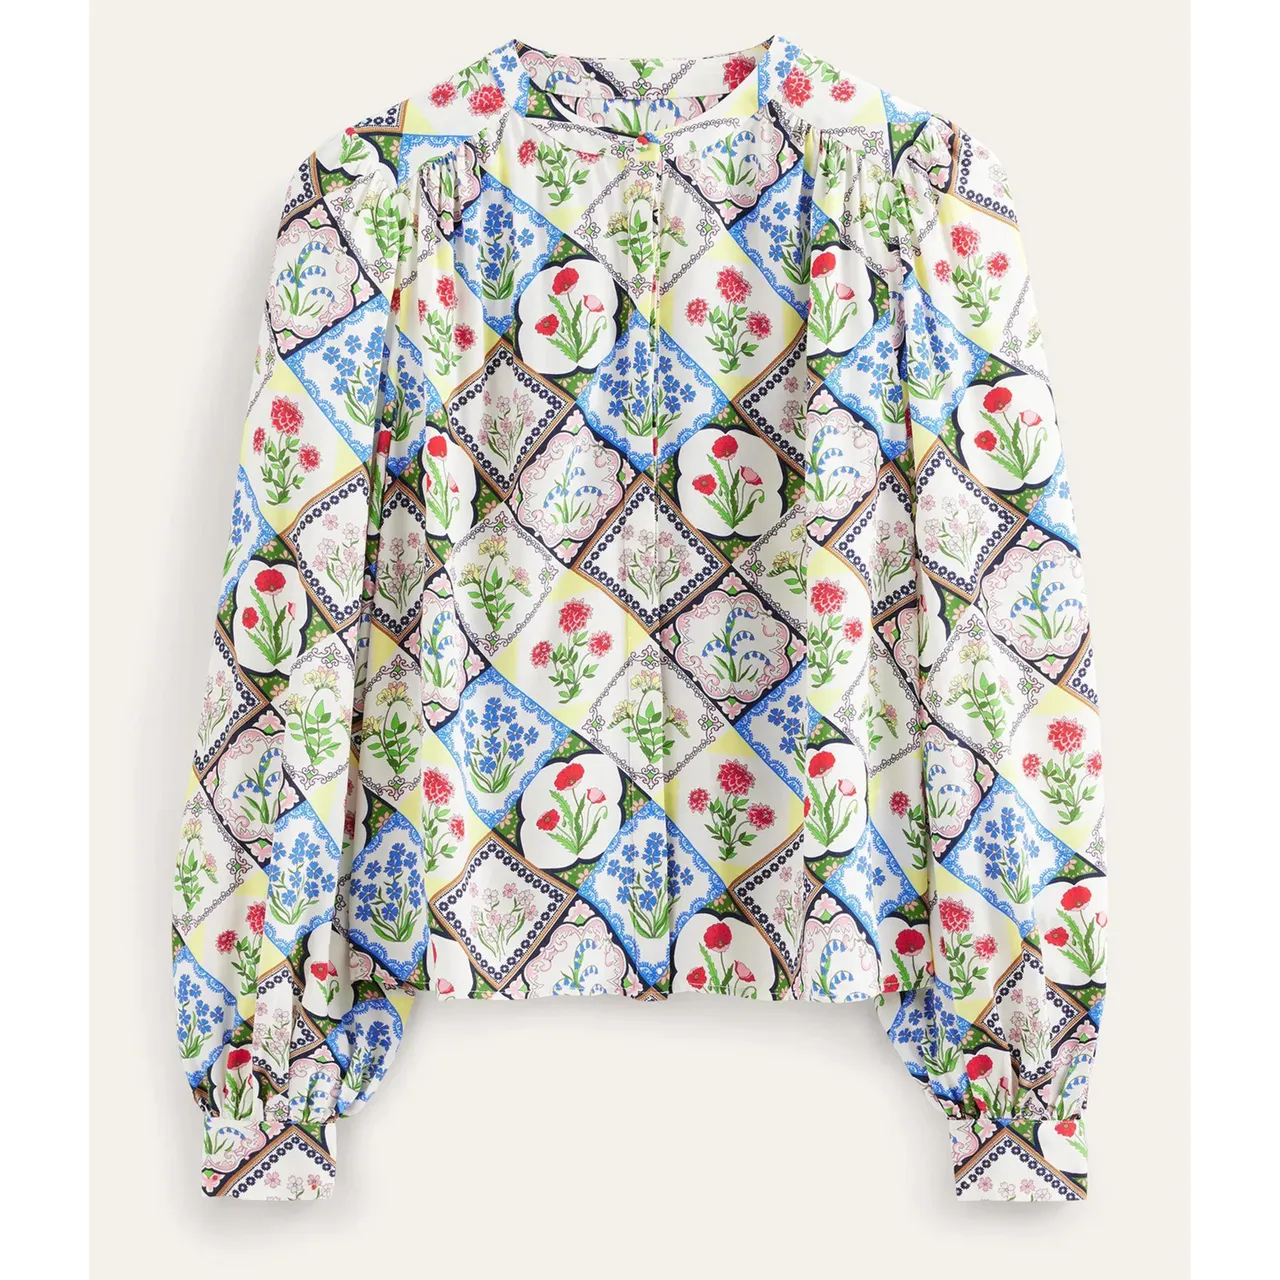 Boden printed blouse